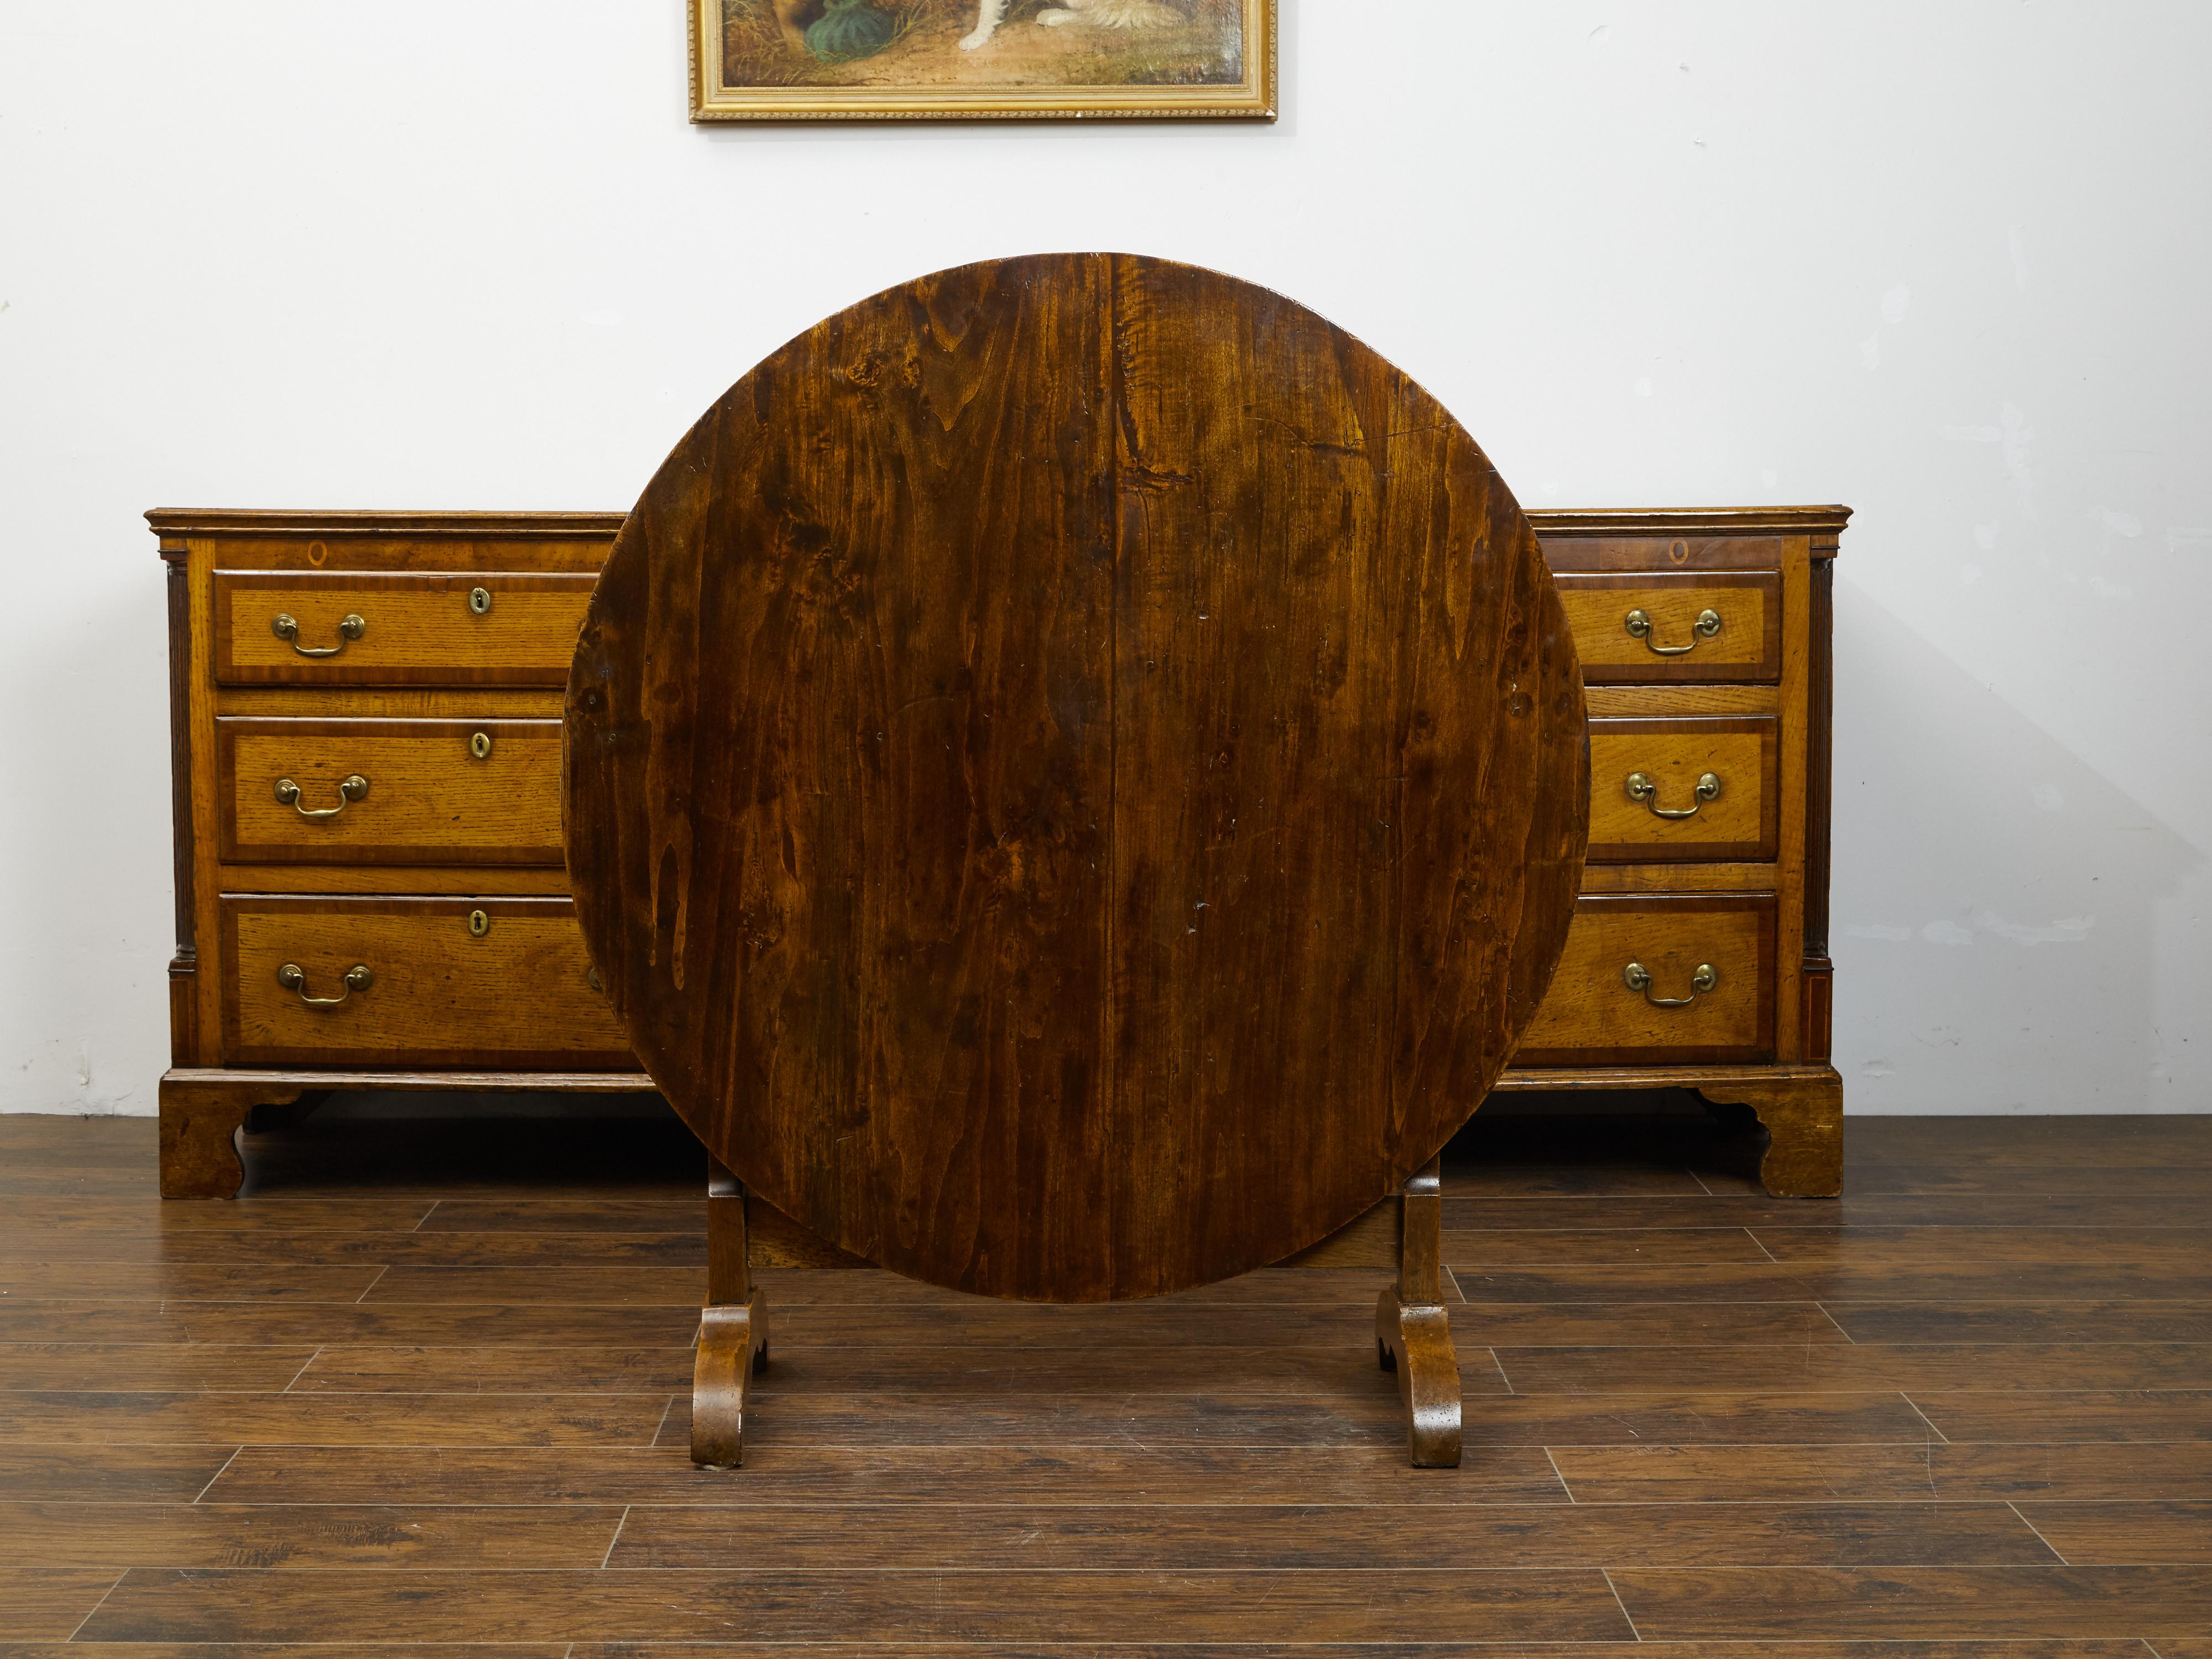 Rustic French 1880s Pine Wine Tasting Tilt-Top Table with Circular Top and Dark Patina